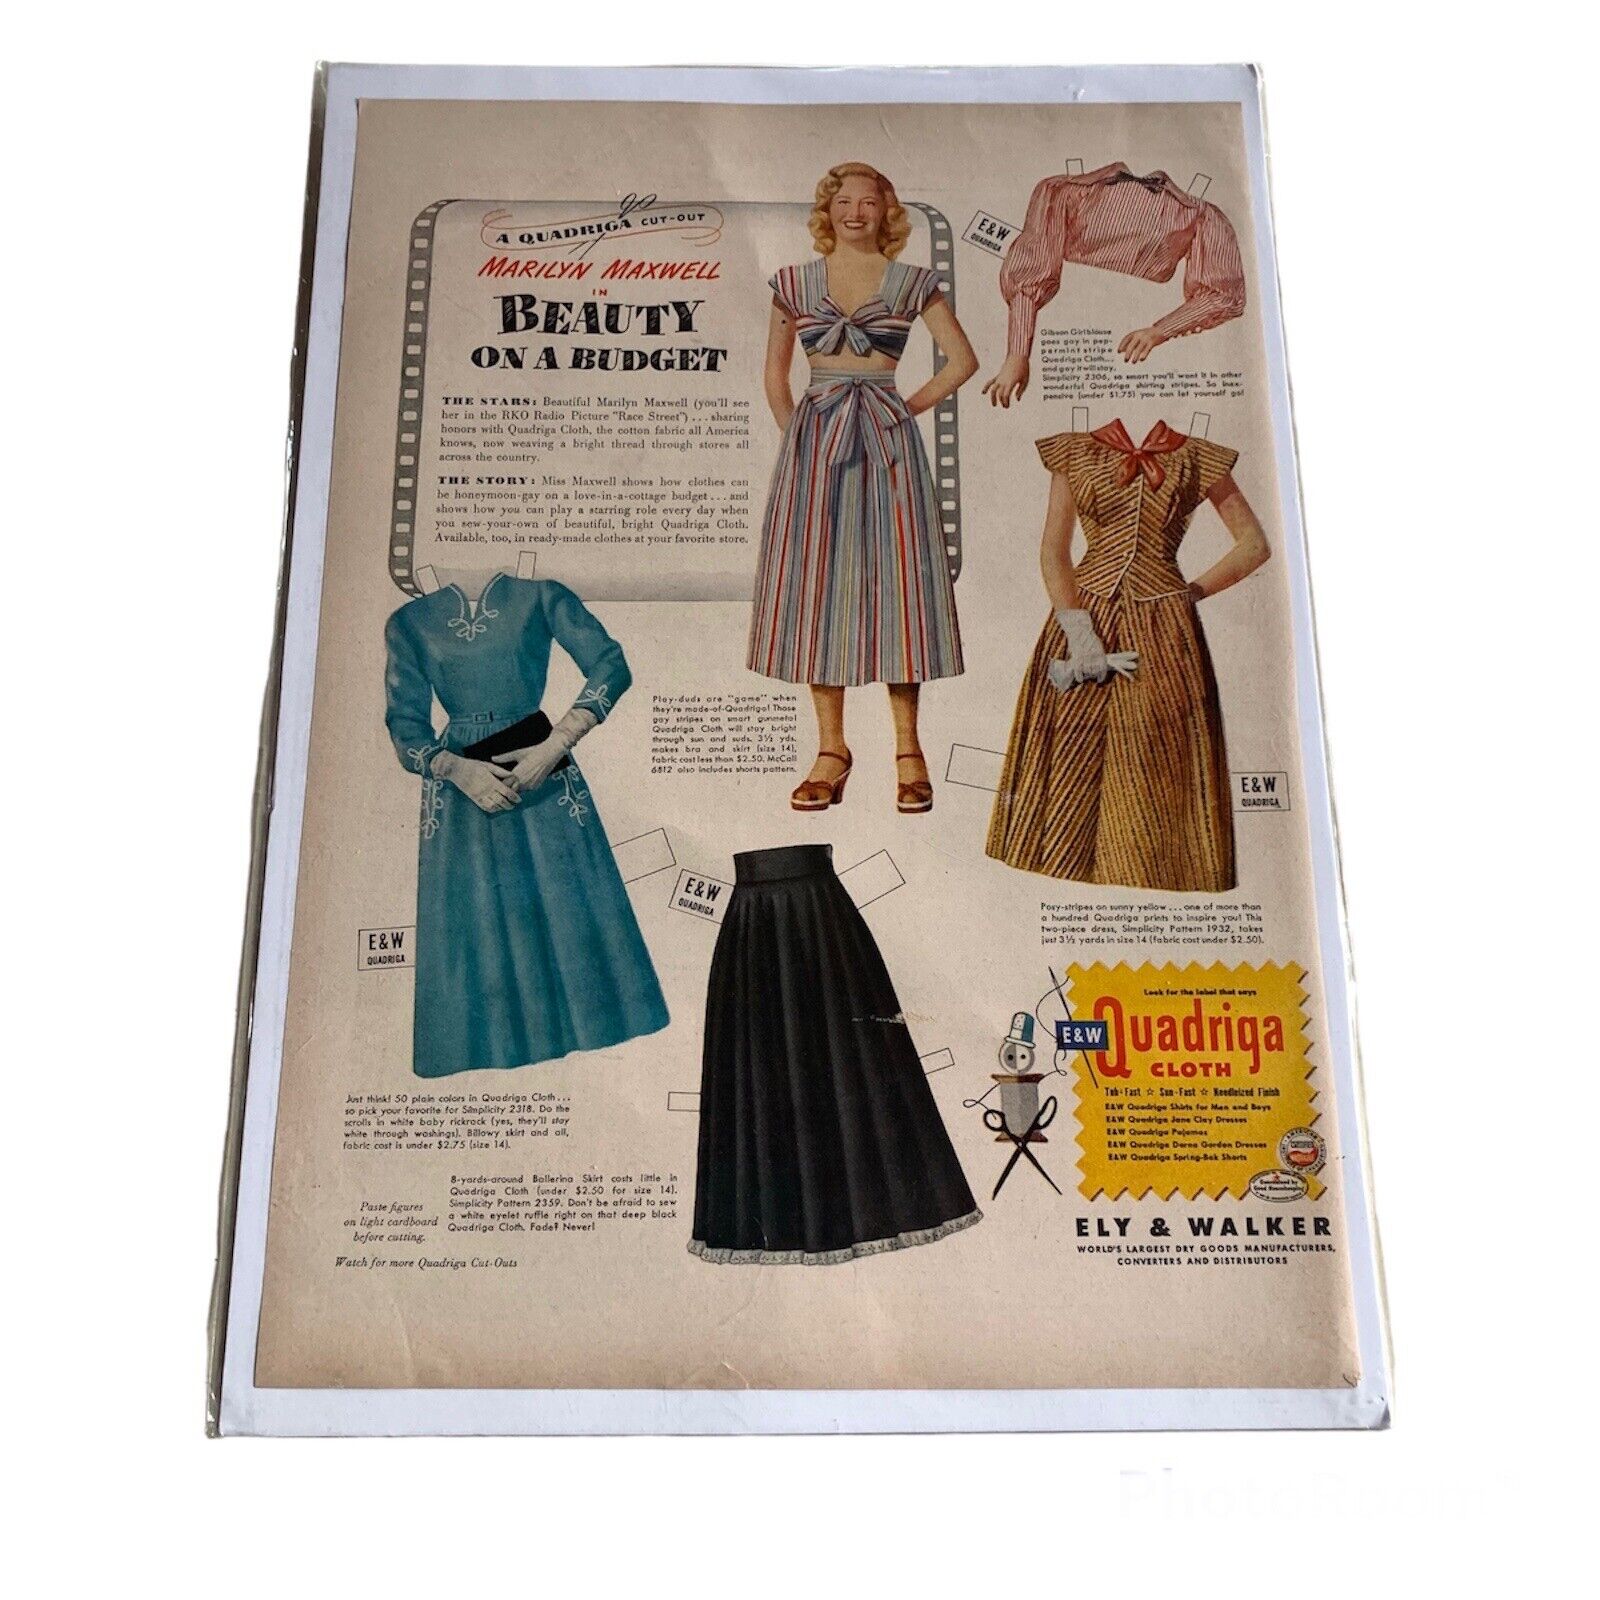 Vintage 1948 Print Ad Marilyn Maxwell Beauty on a Budget Paper Doll Ely Walker